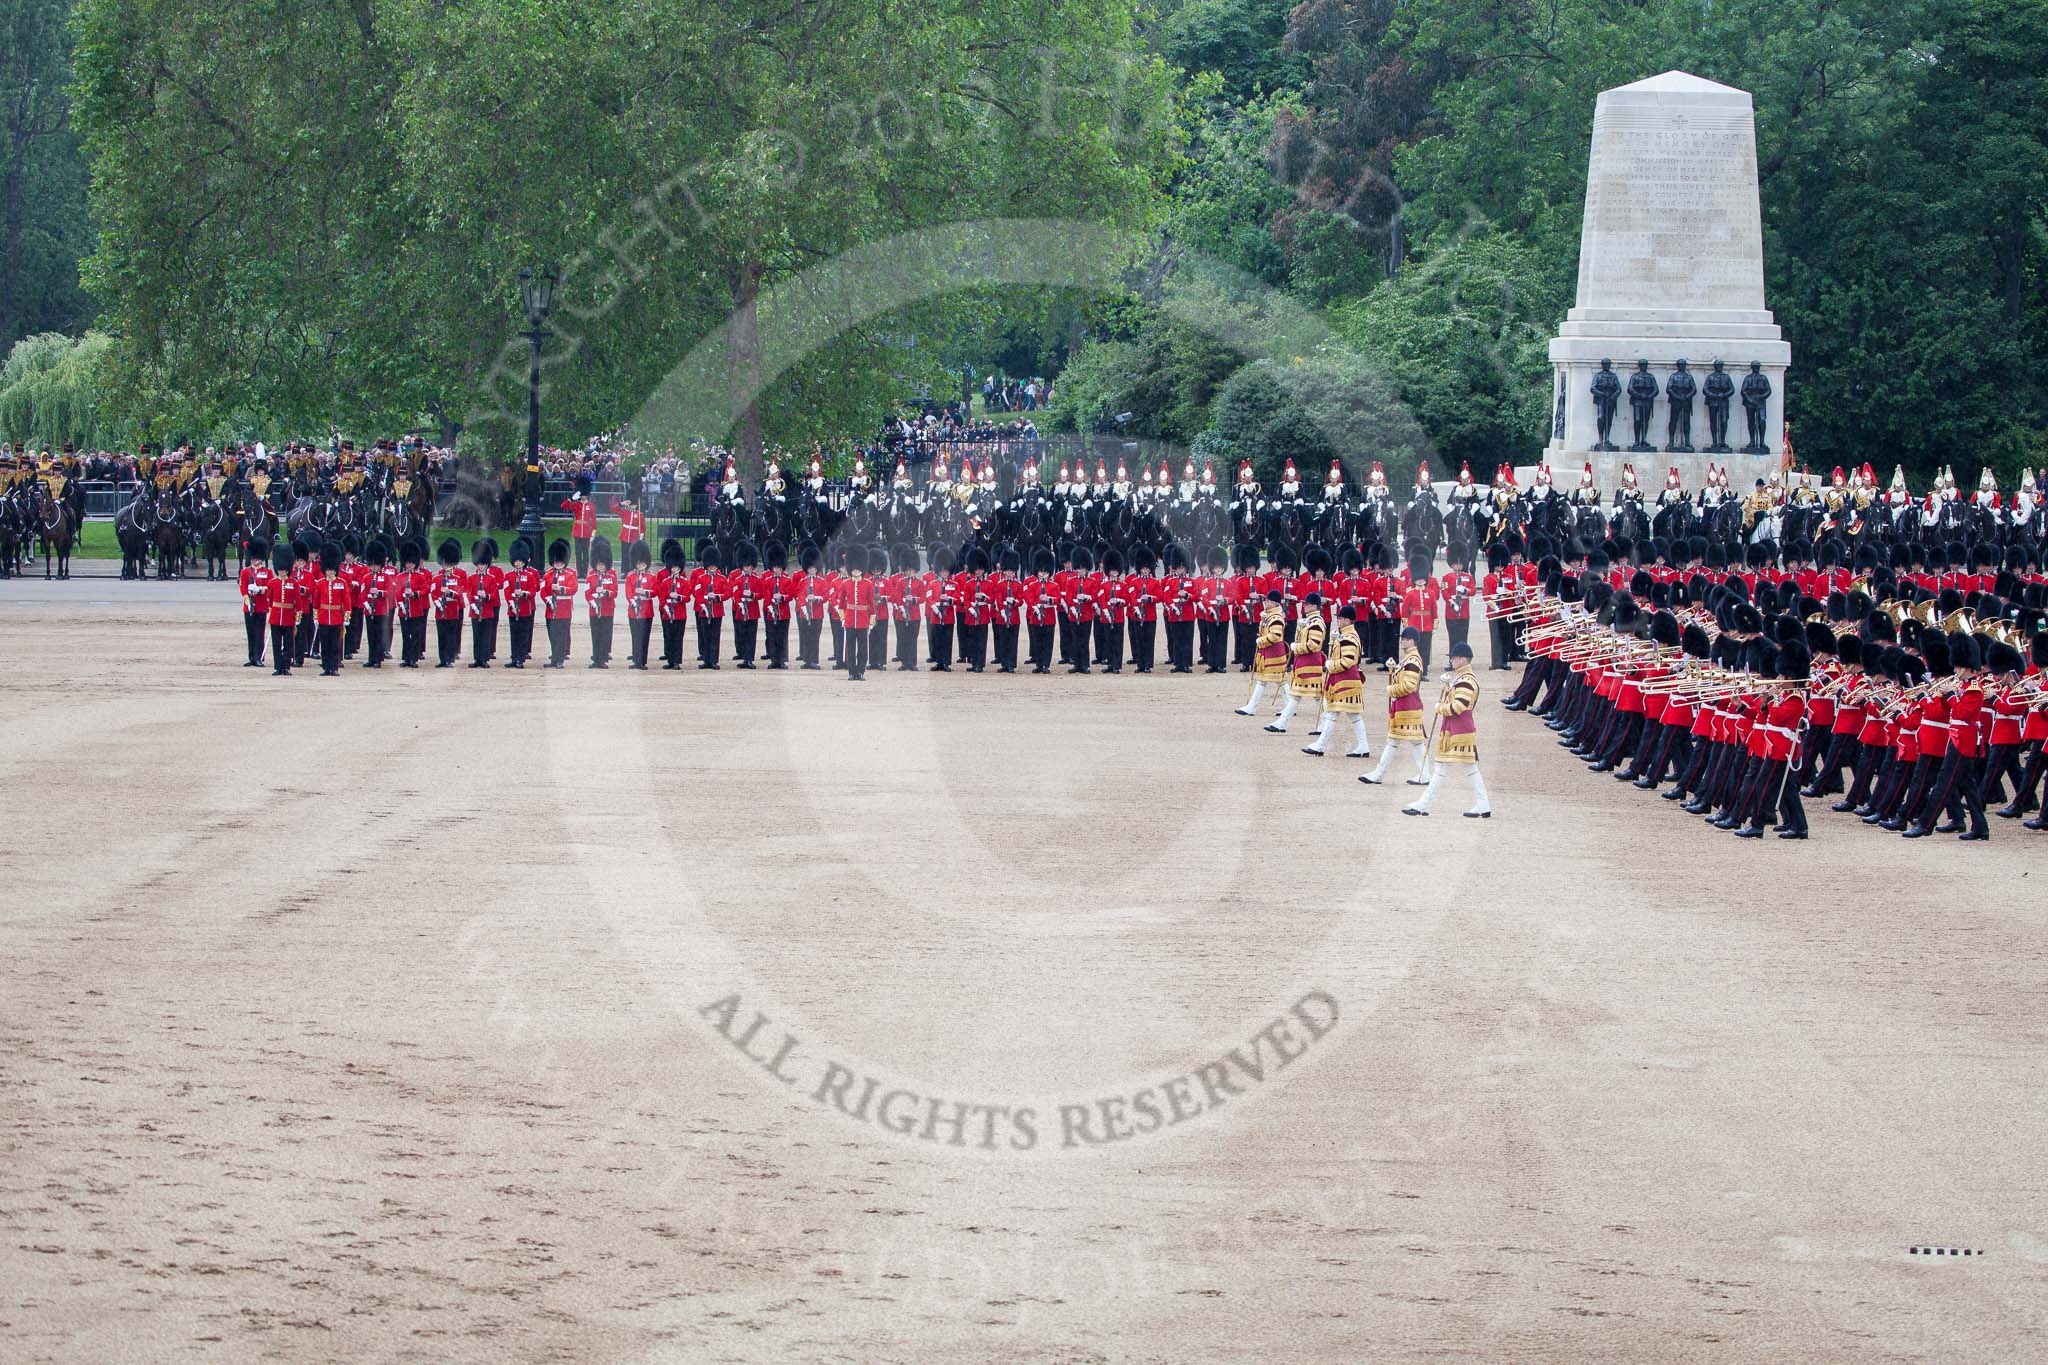 Trooping the Colour 2012: "Present Arms", as the trooping of the Colour is about to begin..
Horse Guards Parade, Westminster,
London SW1,

United Kingdom,
on 16 June 2012 at 11:25, image #339